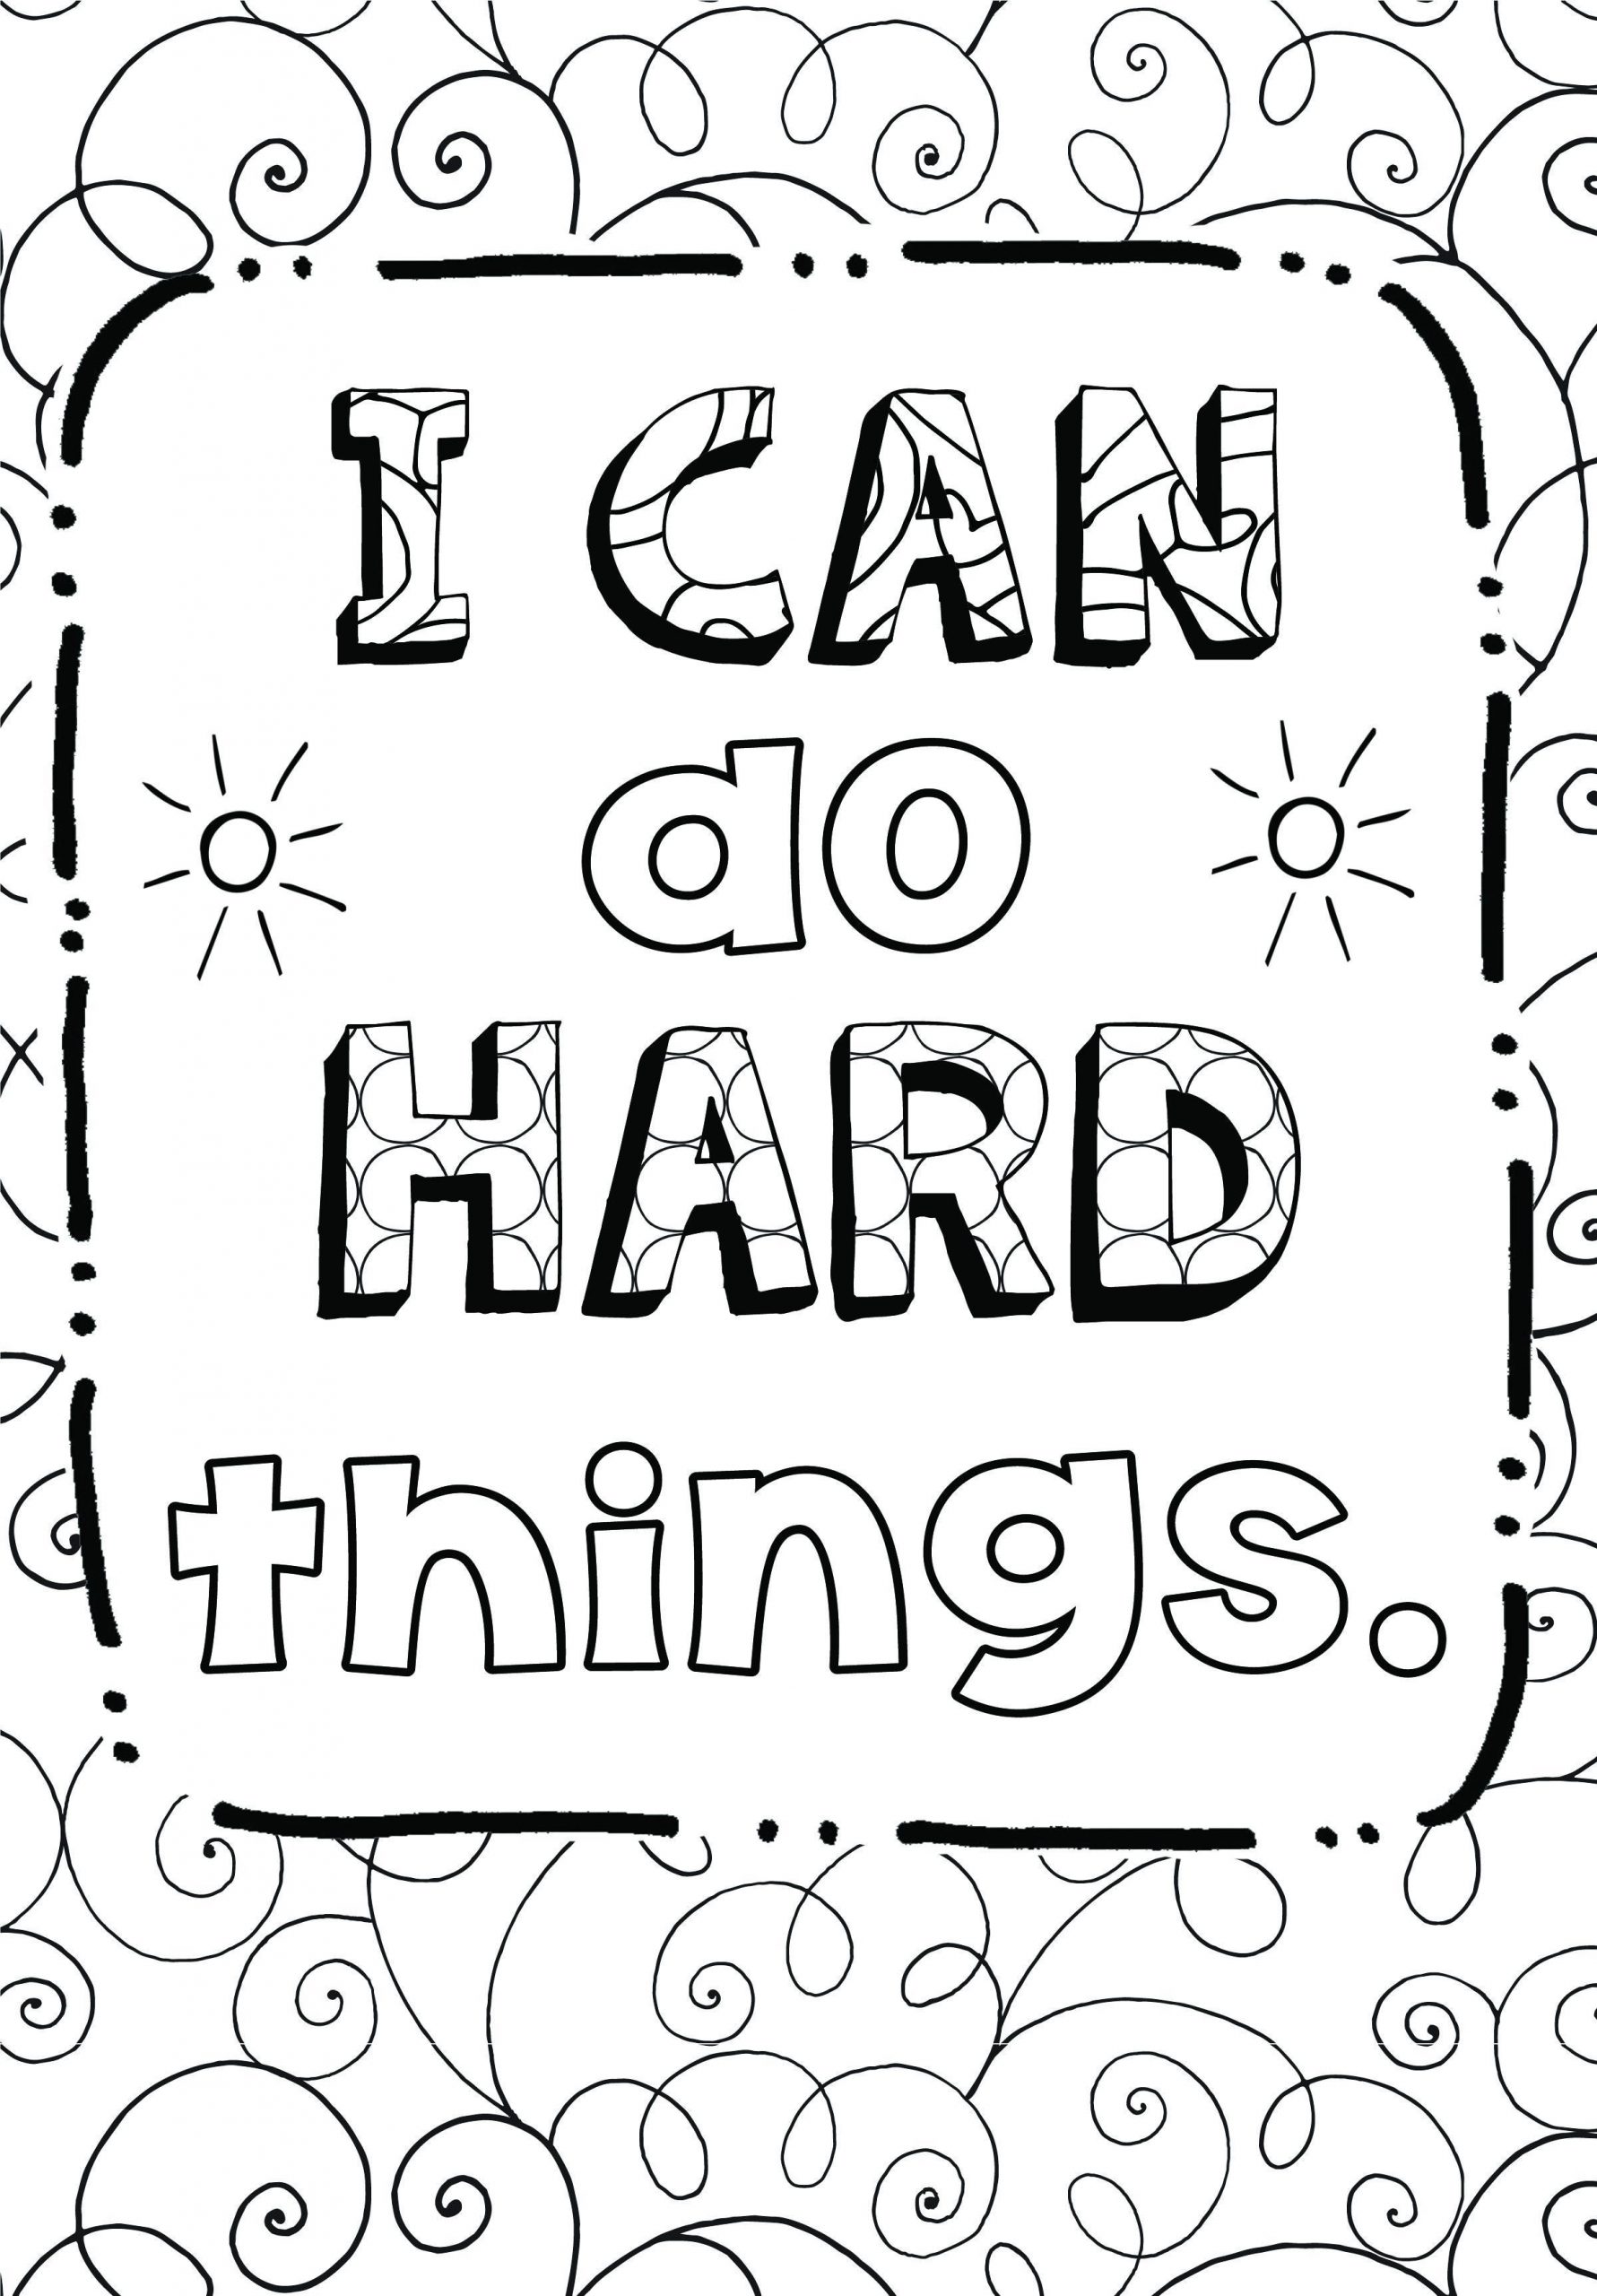 I can do hard things